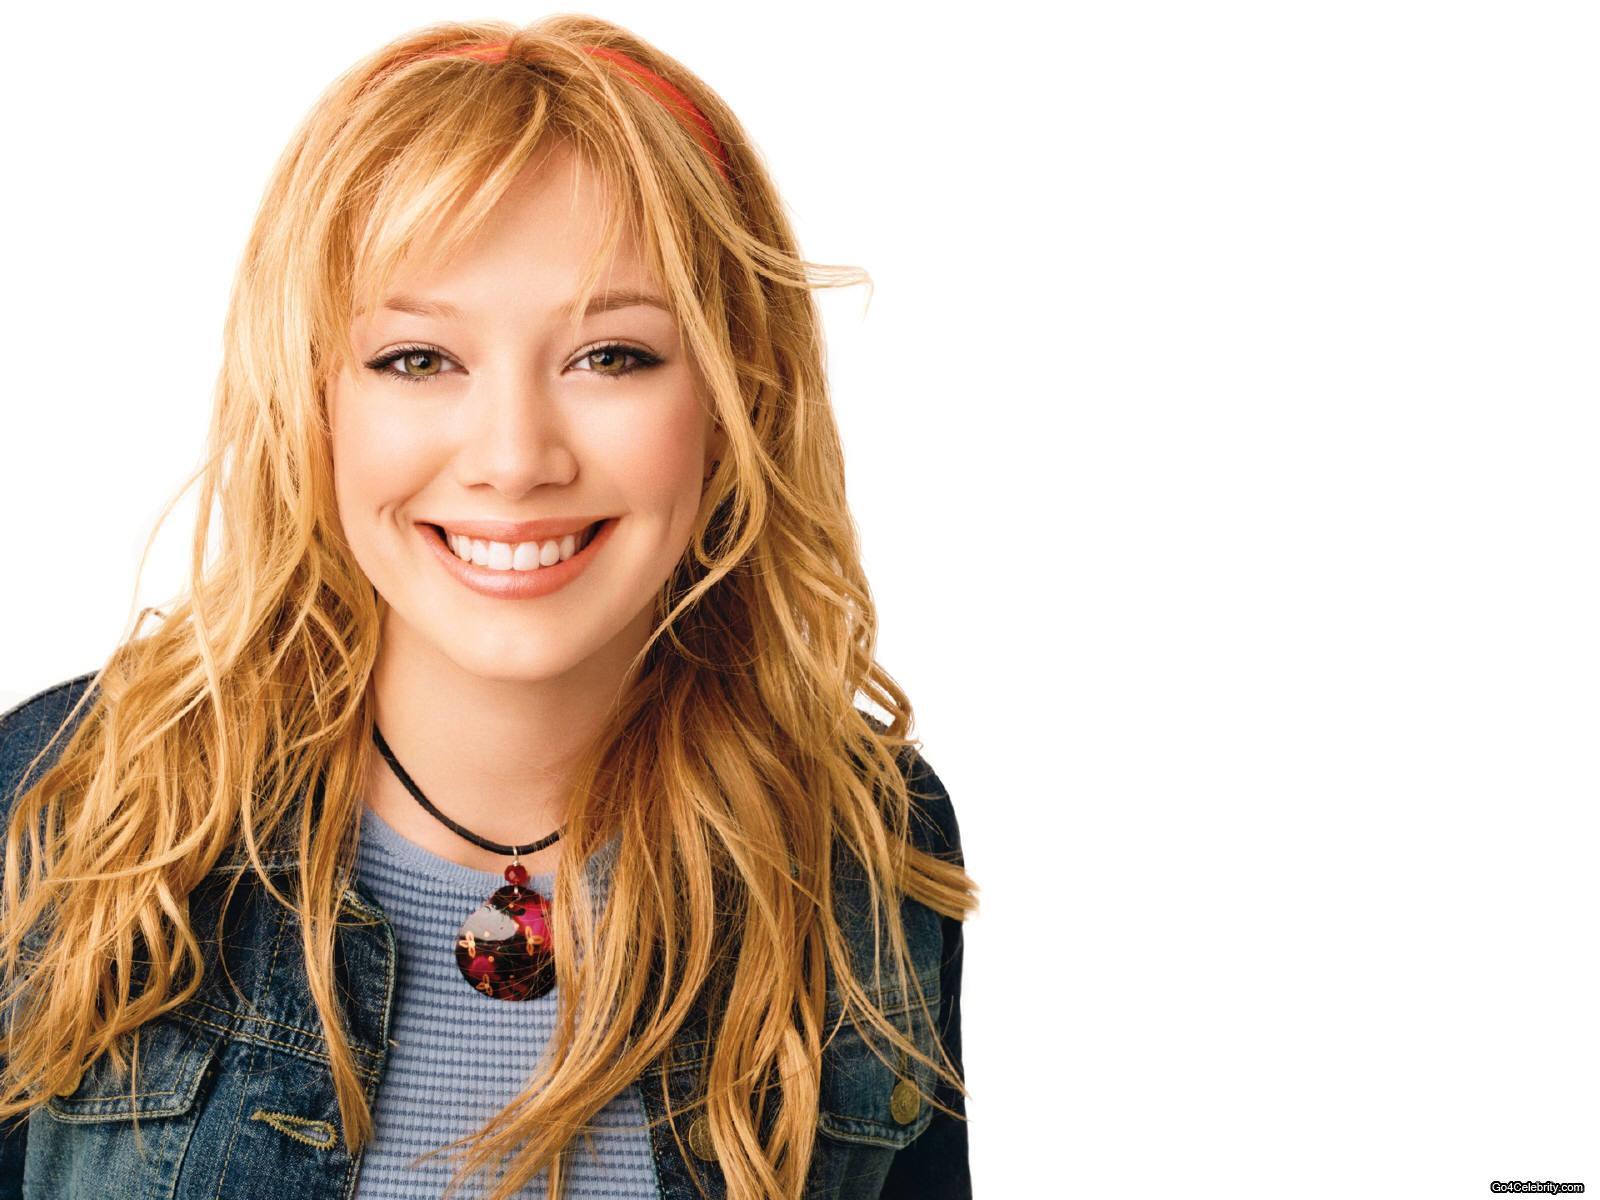 Lizzie McGuire Theme Song | Movie Theme Songs & TV Soundtracks